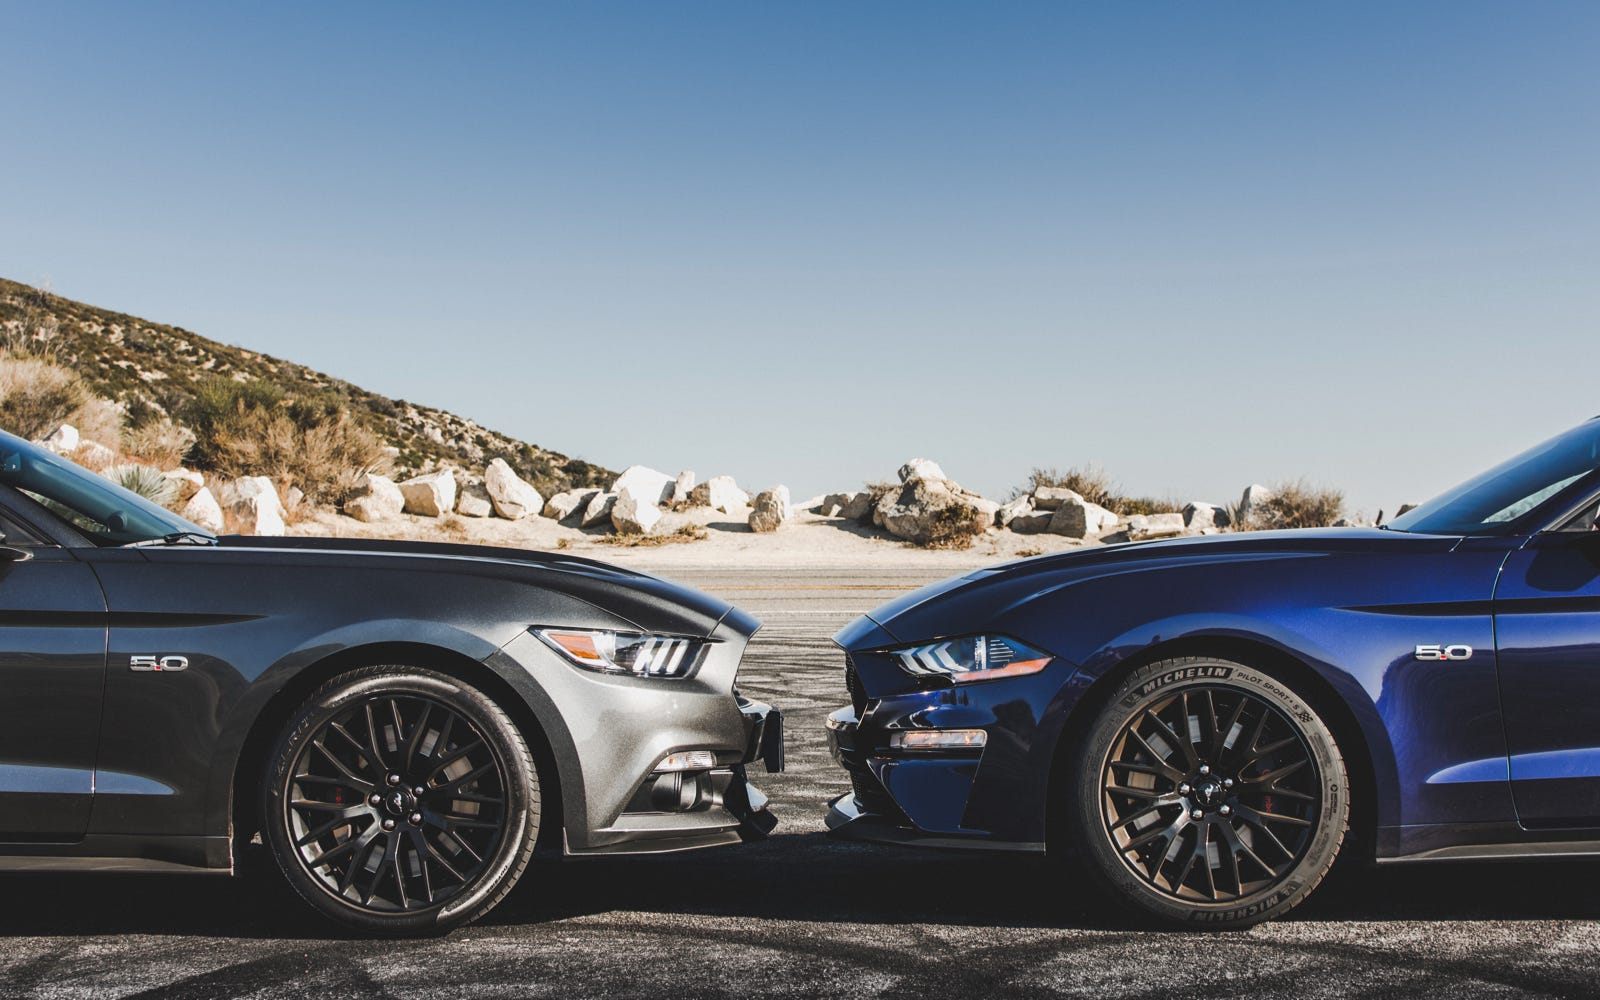 How The 2018 Ford Mustang Gt Really Compares To The Latter